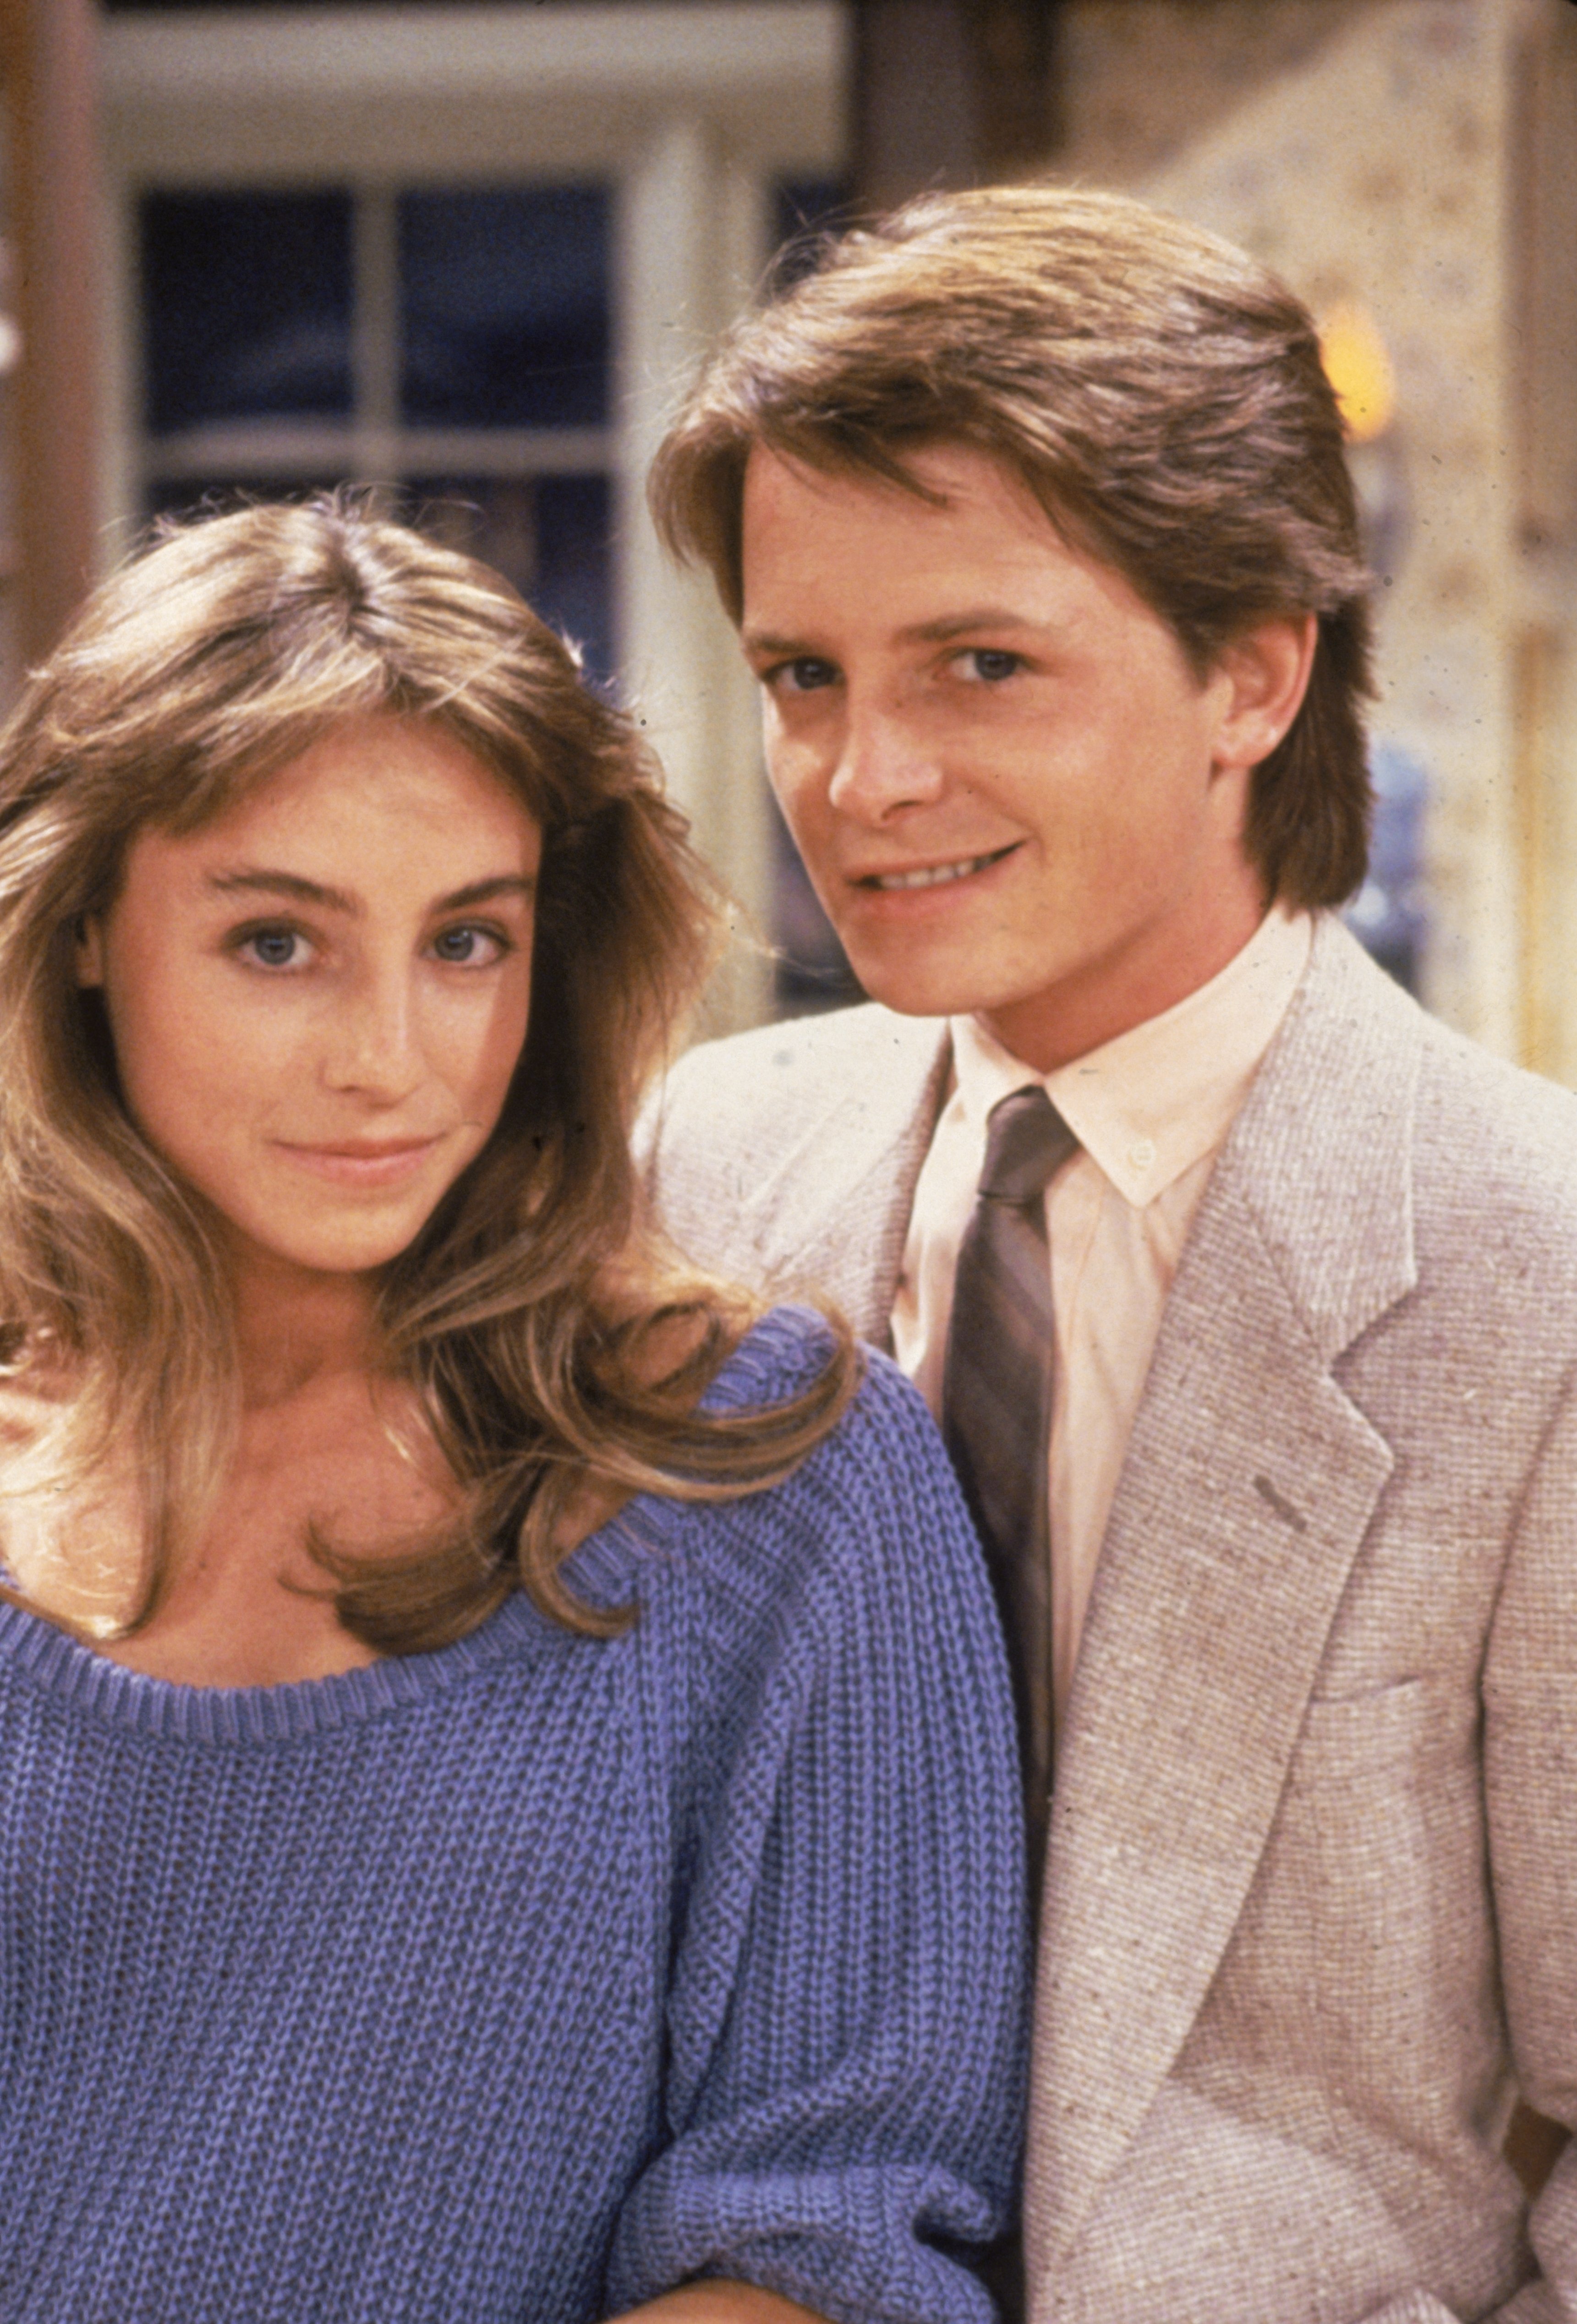 Promotional portrait of actors Michael J. Fox and Tracy Pollan on the set of the television series, "Family Ties." Fox and Pollan were married in 1988. | Source: Getty Images